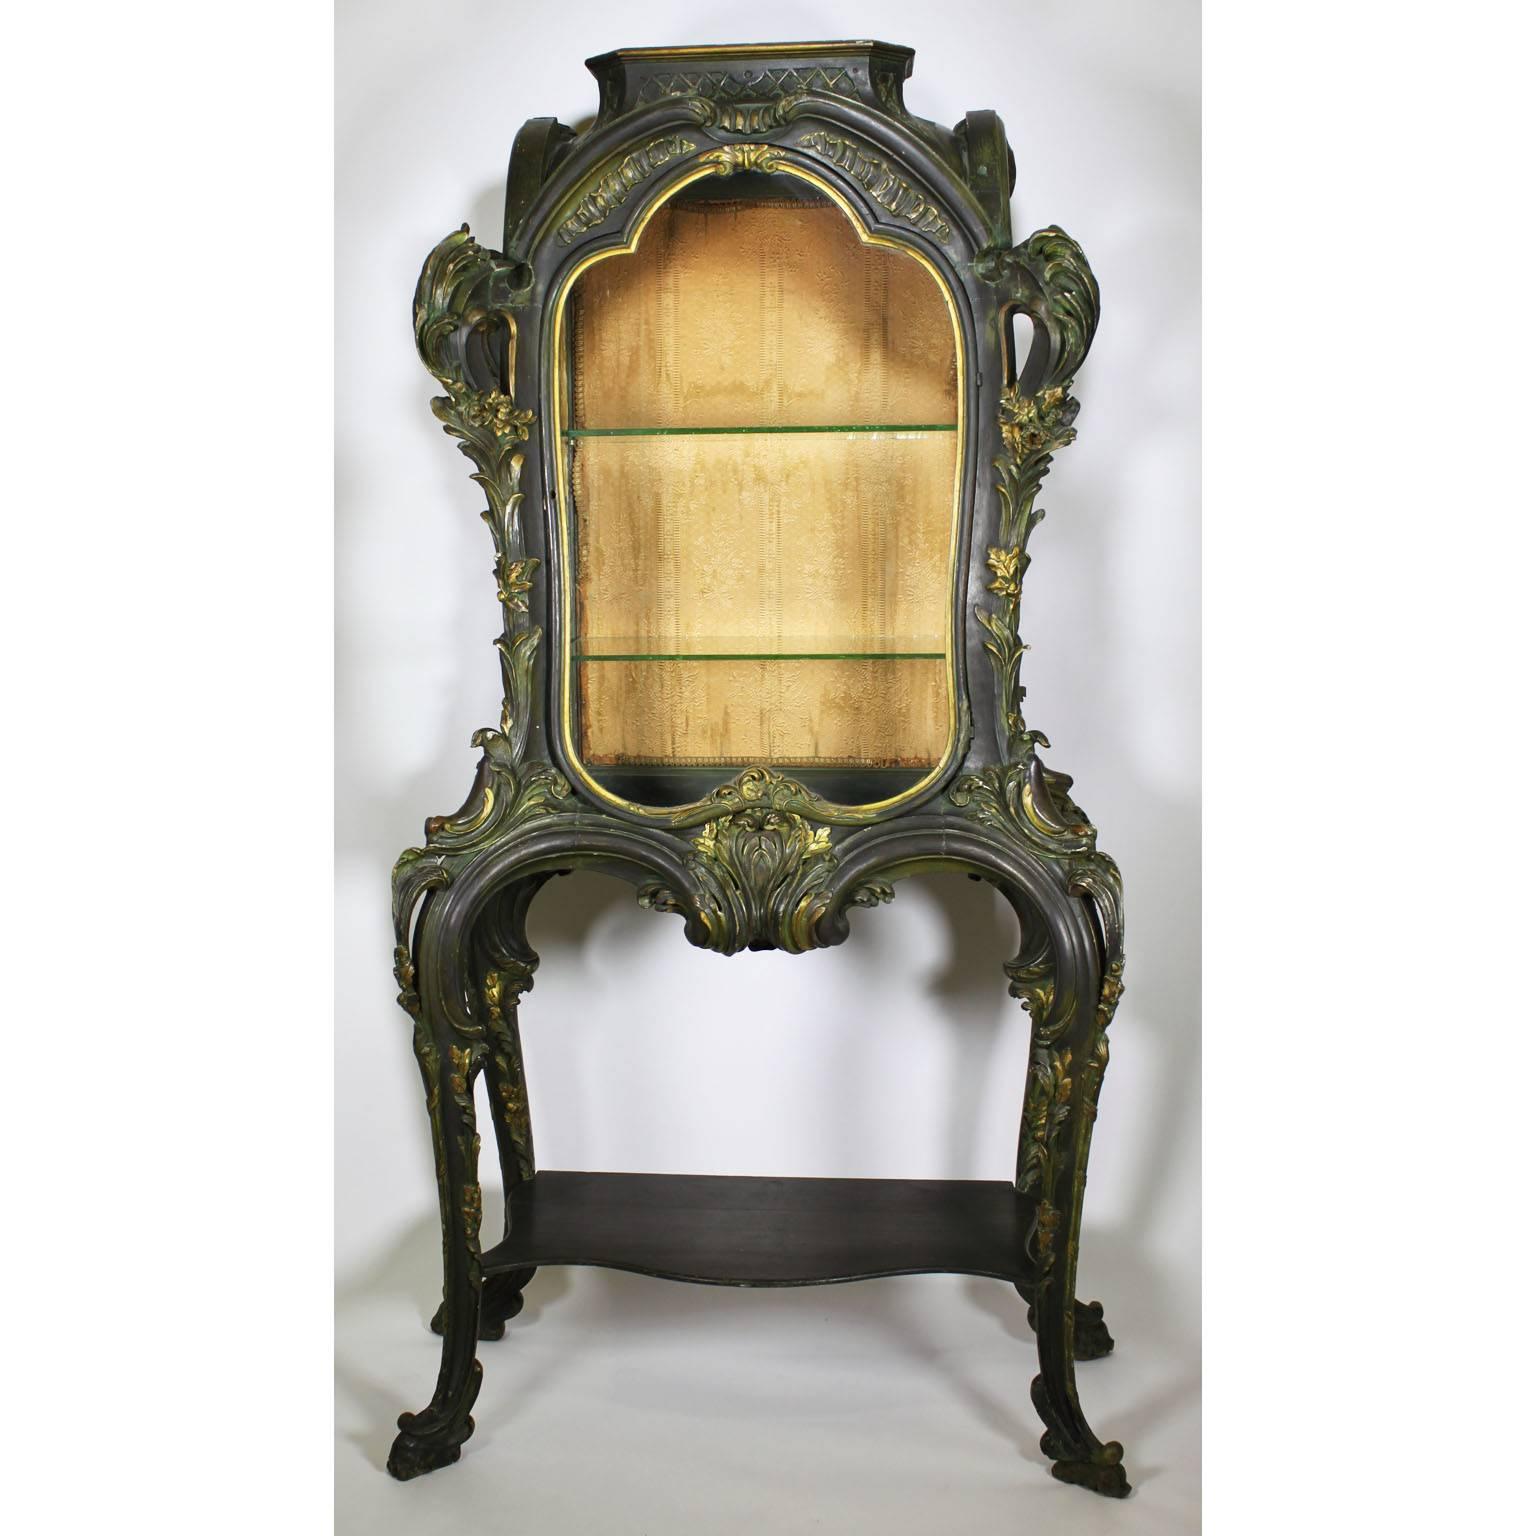 A whimsical rare French 19th-20th century whimsical Art Nouveau green and parcel giltwood carved single door vitrine cabinet. The highly stylized body with a front glass door and two side glass panels all flowing with curvilinear forms of organic,